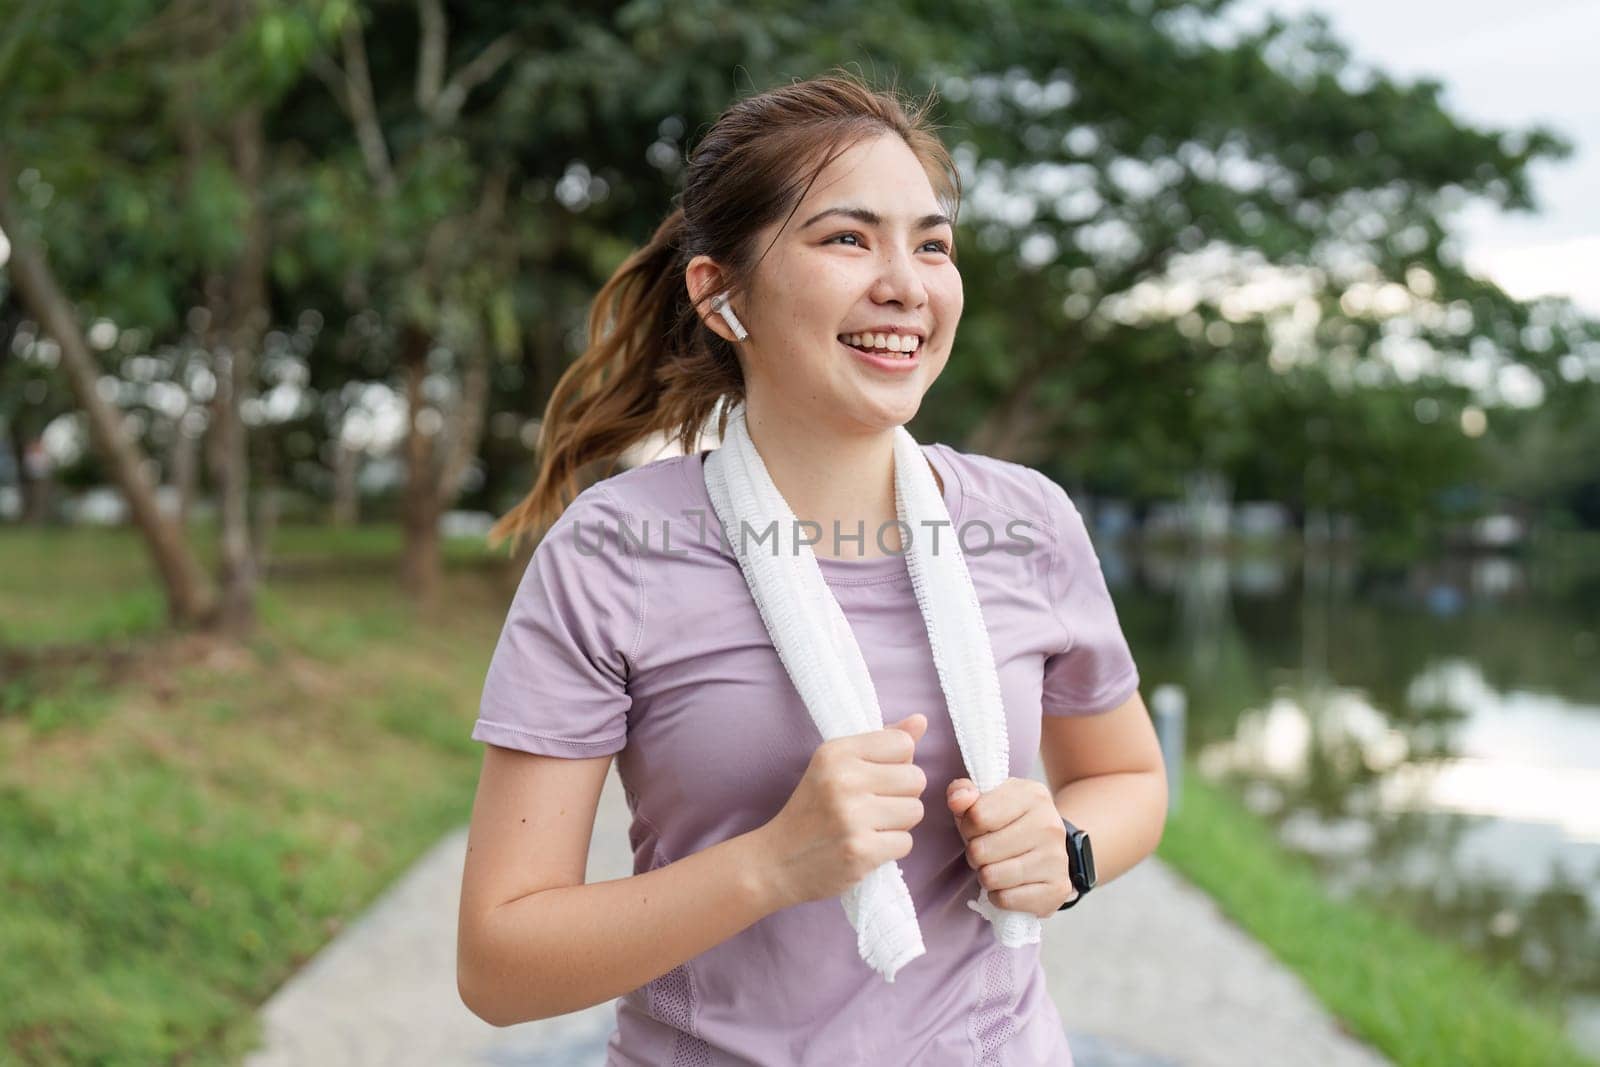 Running woman. Female Runner Jogging during Outdoor Workout in a Park. Healthy lifestyle. Morning.